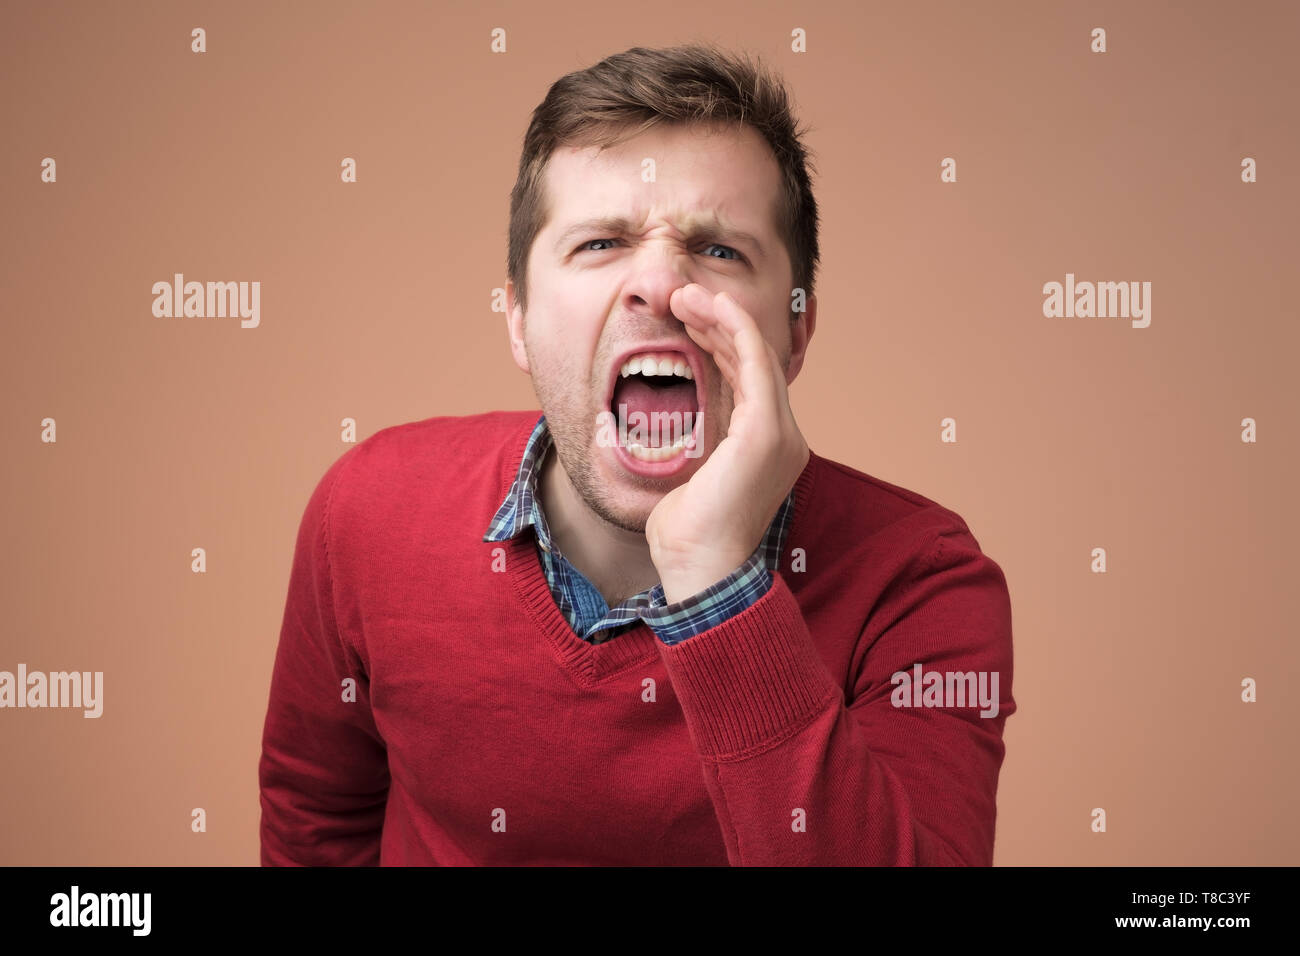 young man in red sweater shouting against brown background Stock Photo